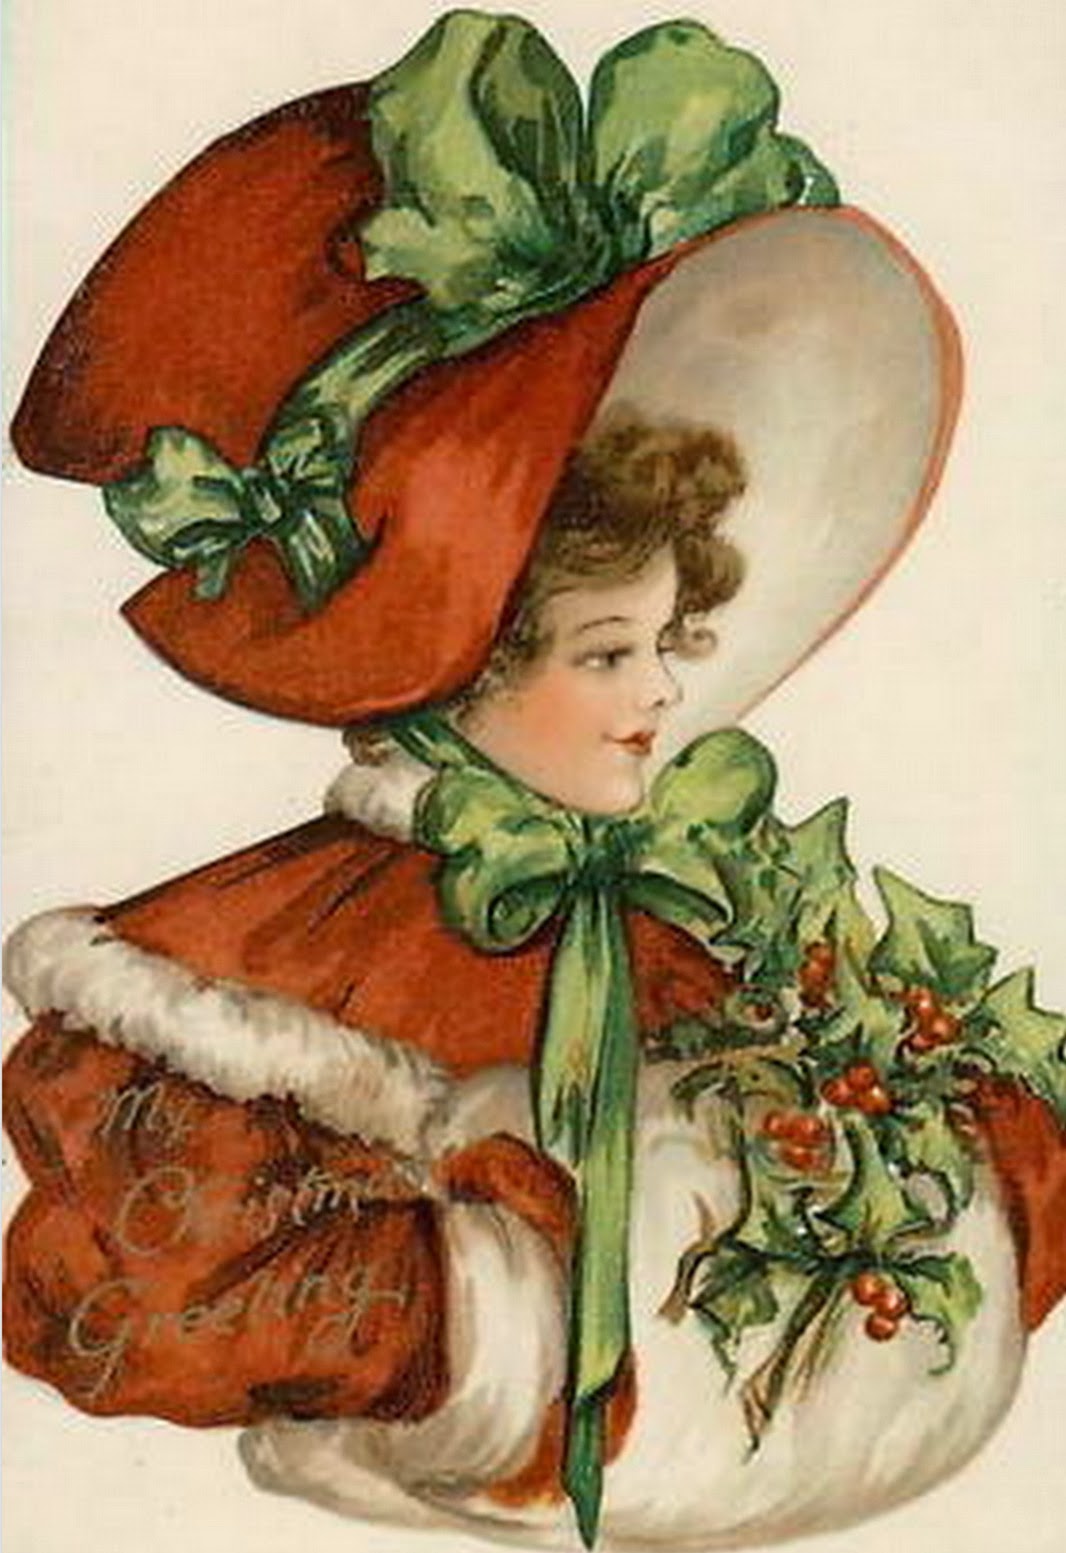 bumble button: Antique postcards of Charming Children in Red Christmas ...